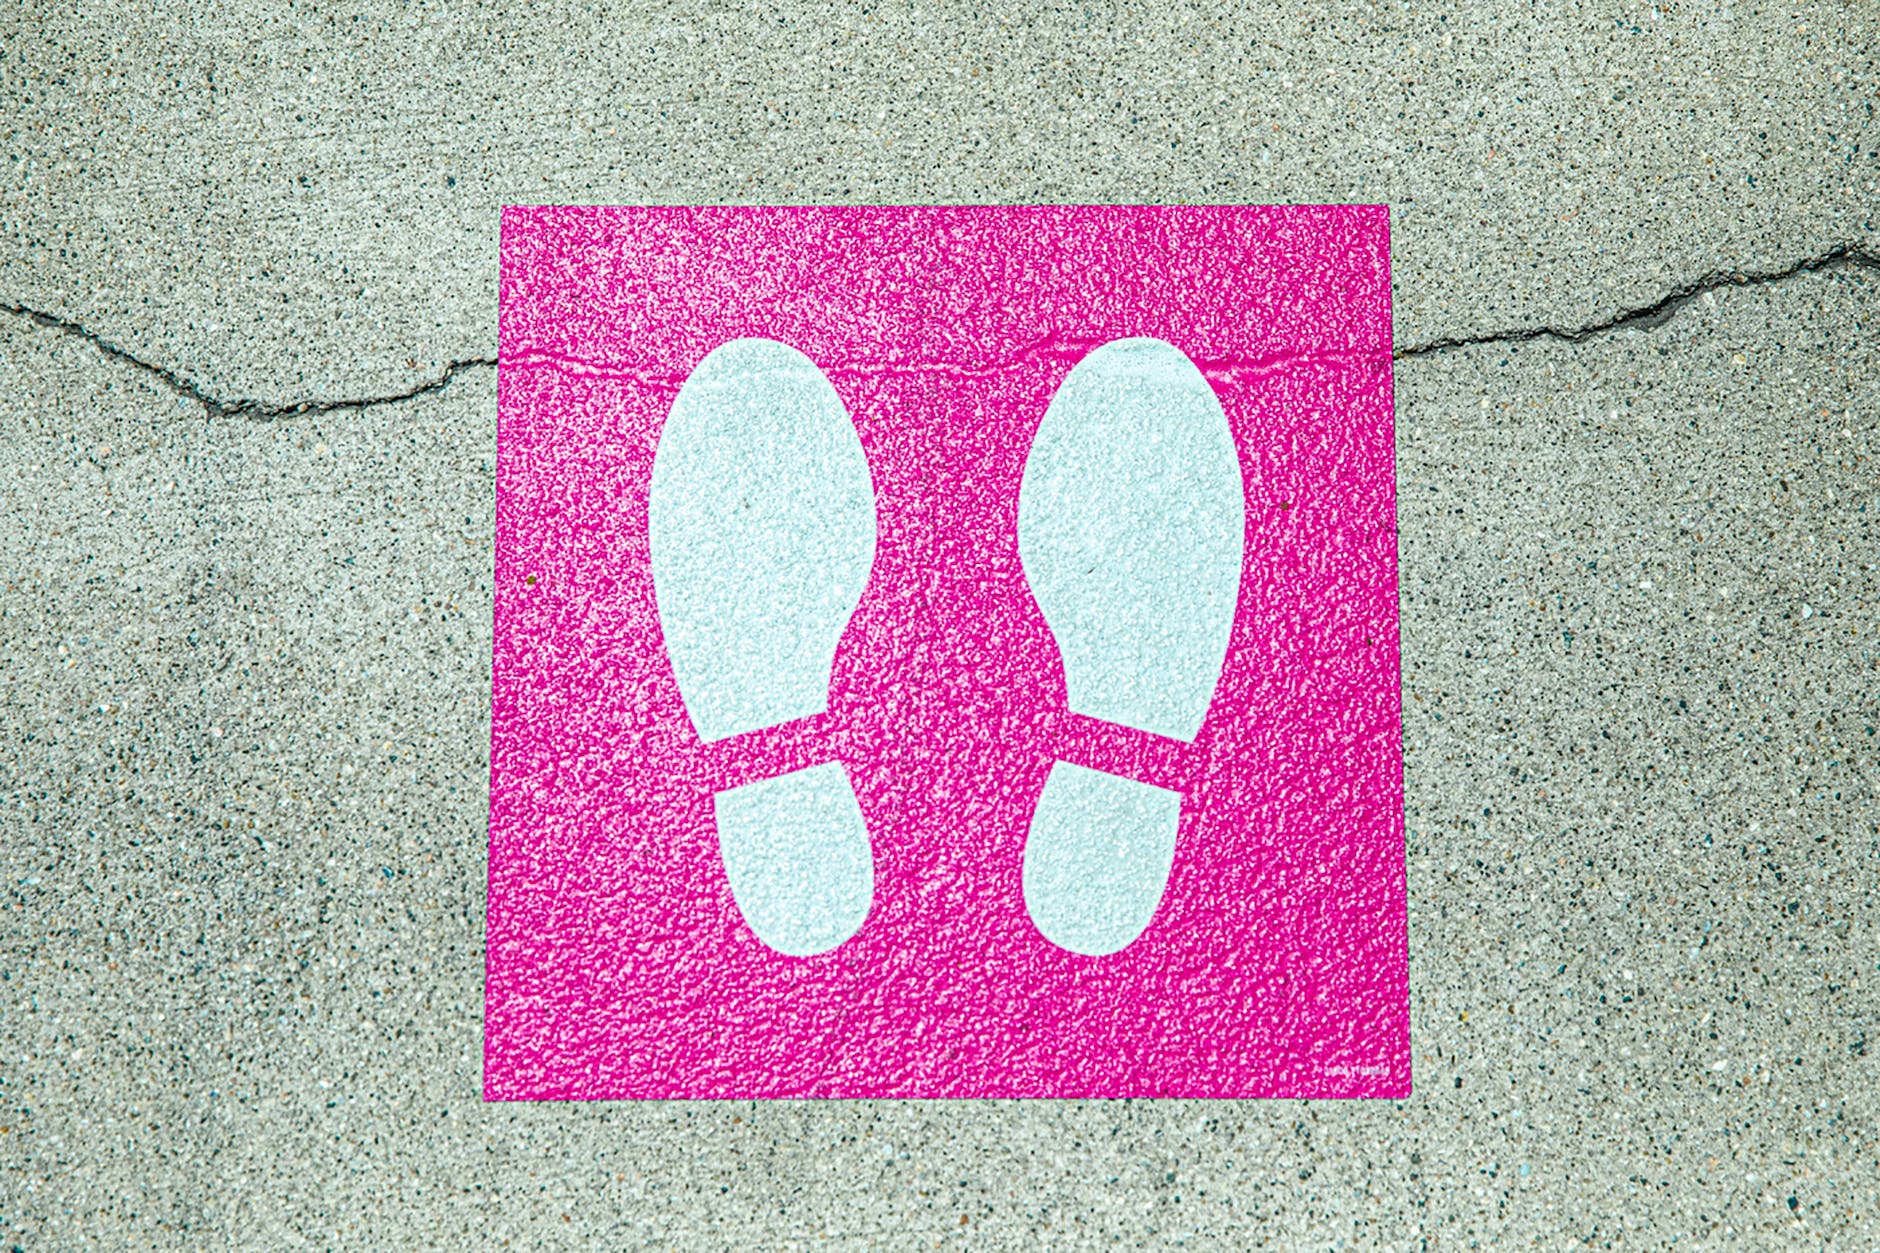 white and pink foot print signage on concrete surface